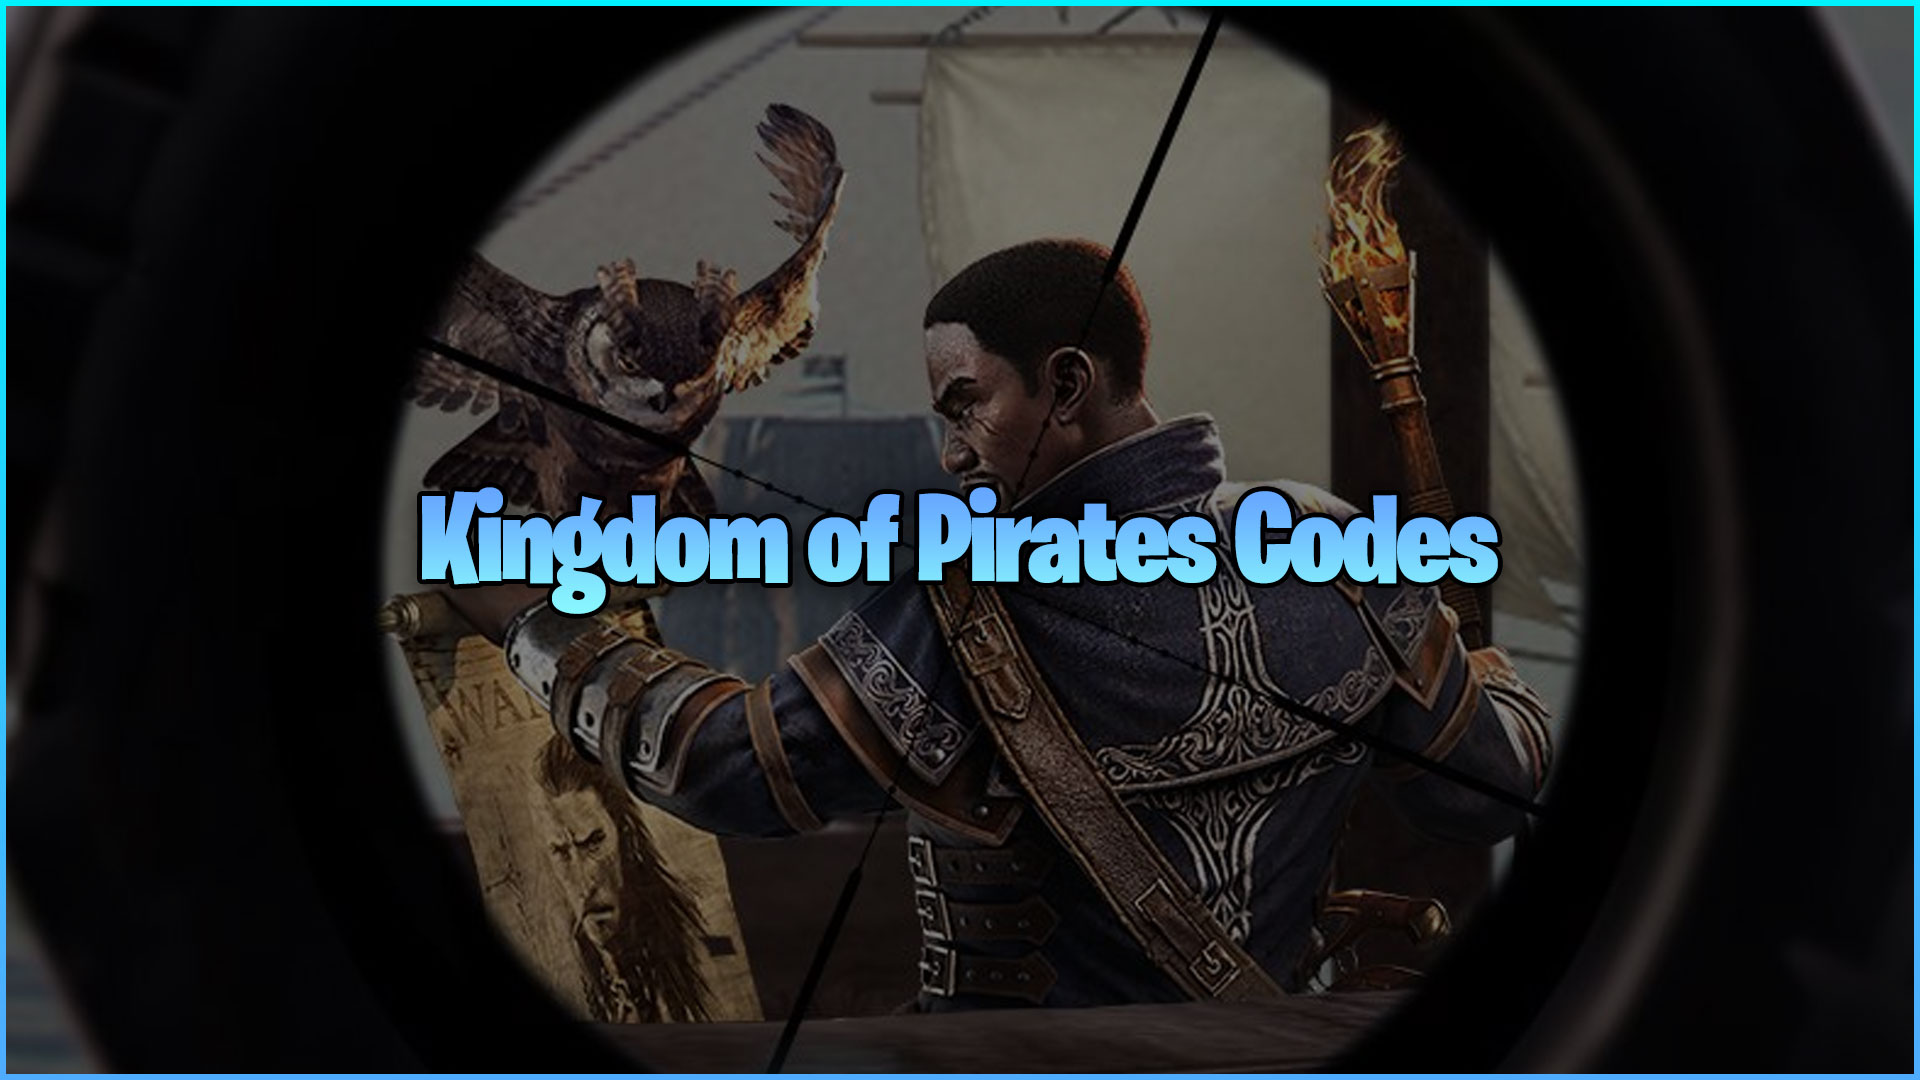 Golden Age Of Pirates & All 5 Giftcodes  5 Redeem Codes Golden Age of  Pirates - How to Redeem Code 